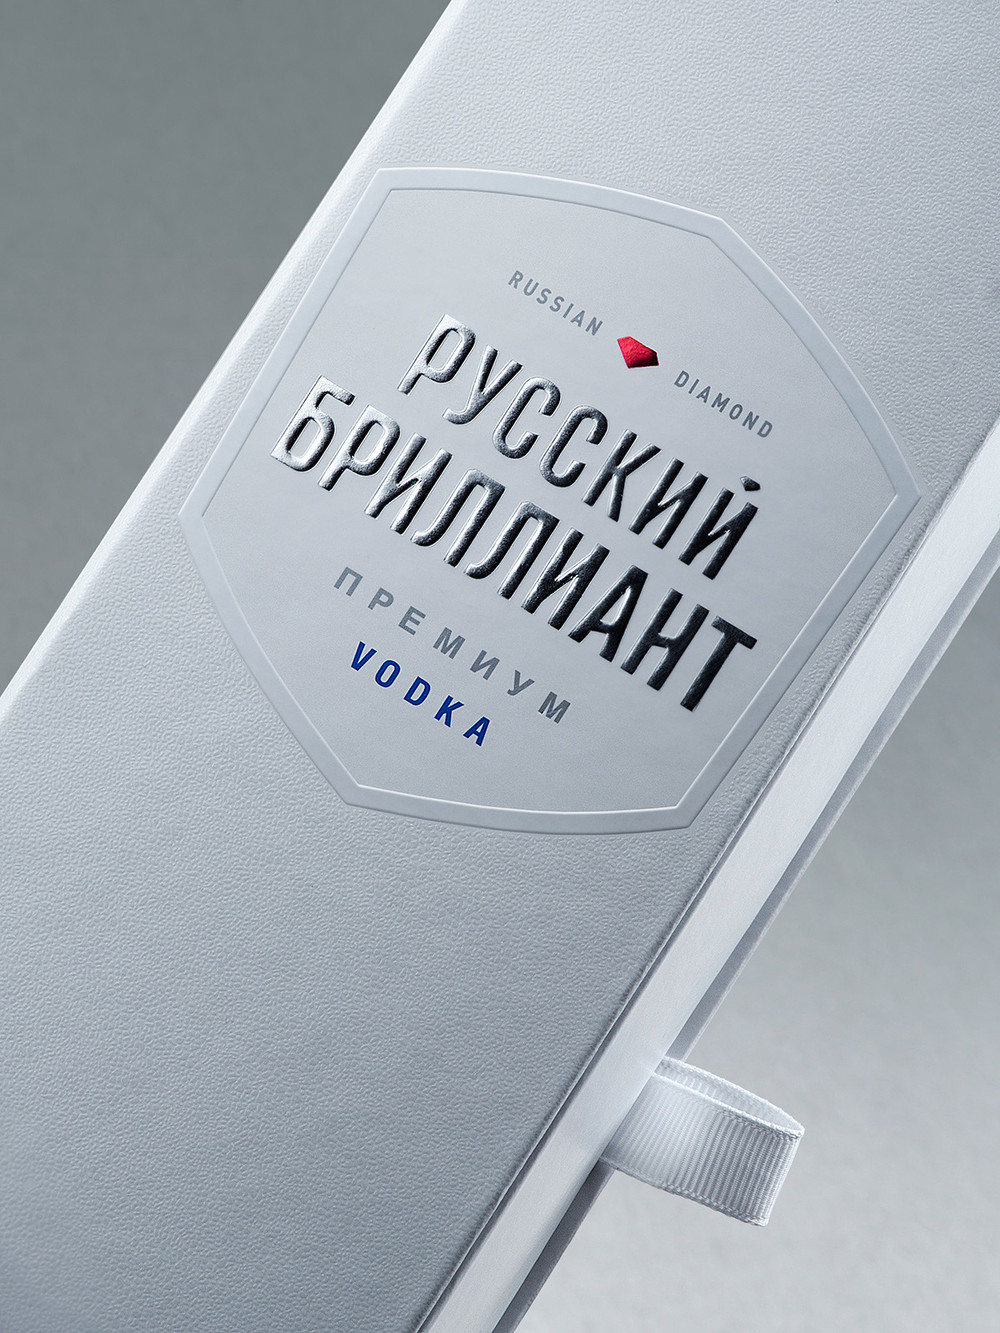 Viewpoint l Branding agency – Gift box Russian Dimond